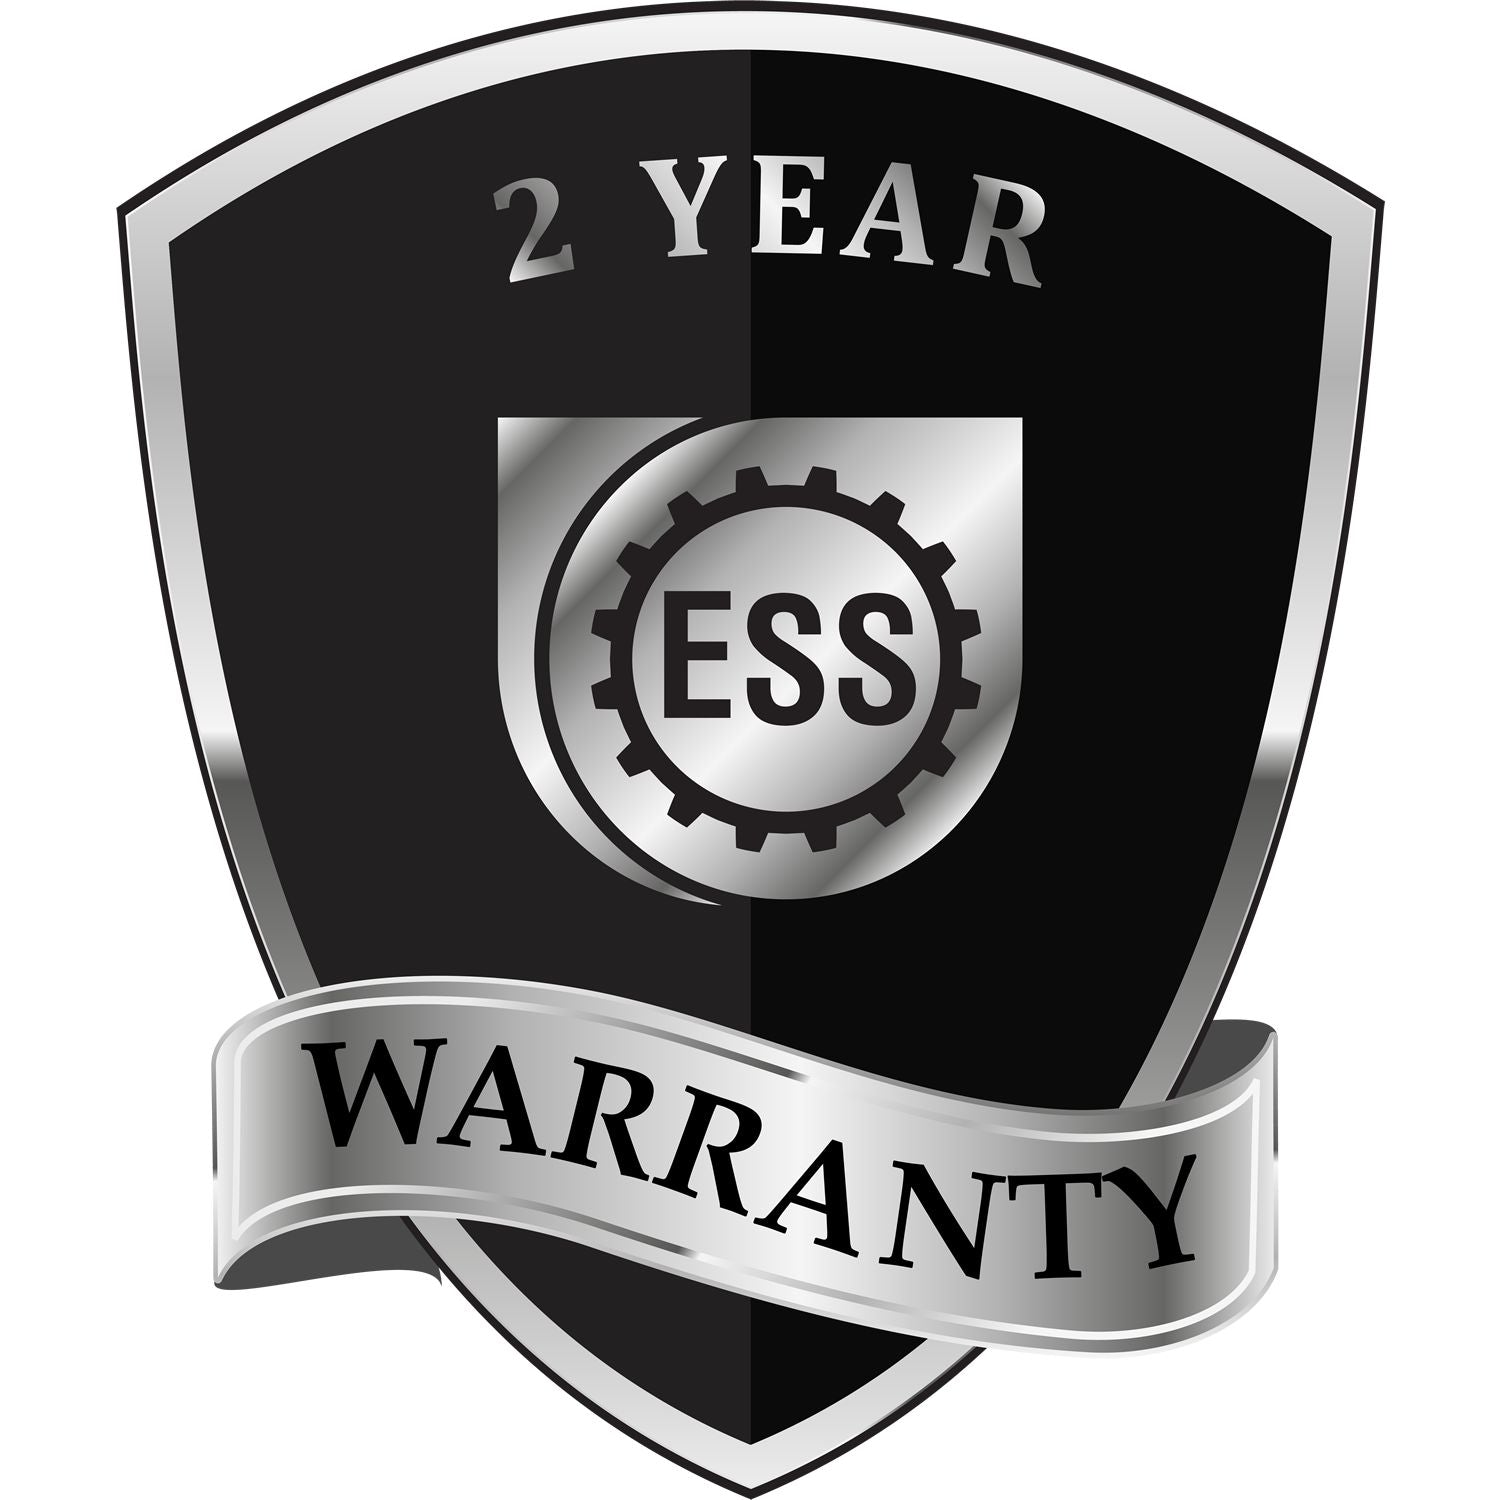 A badge or emblem showing a warranty icon for the Soft Wisconsin Professional Engineer Seal